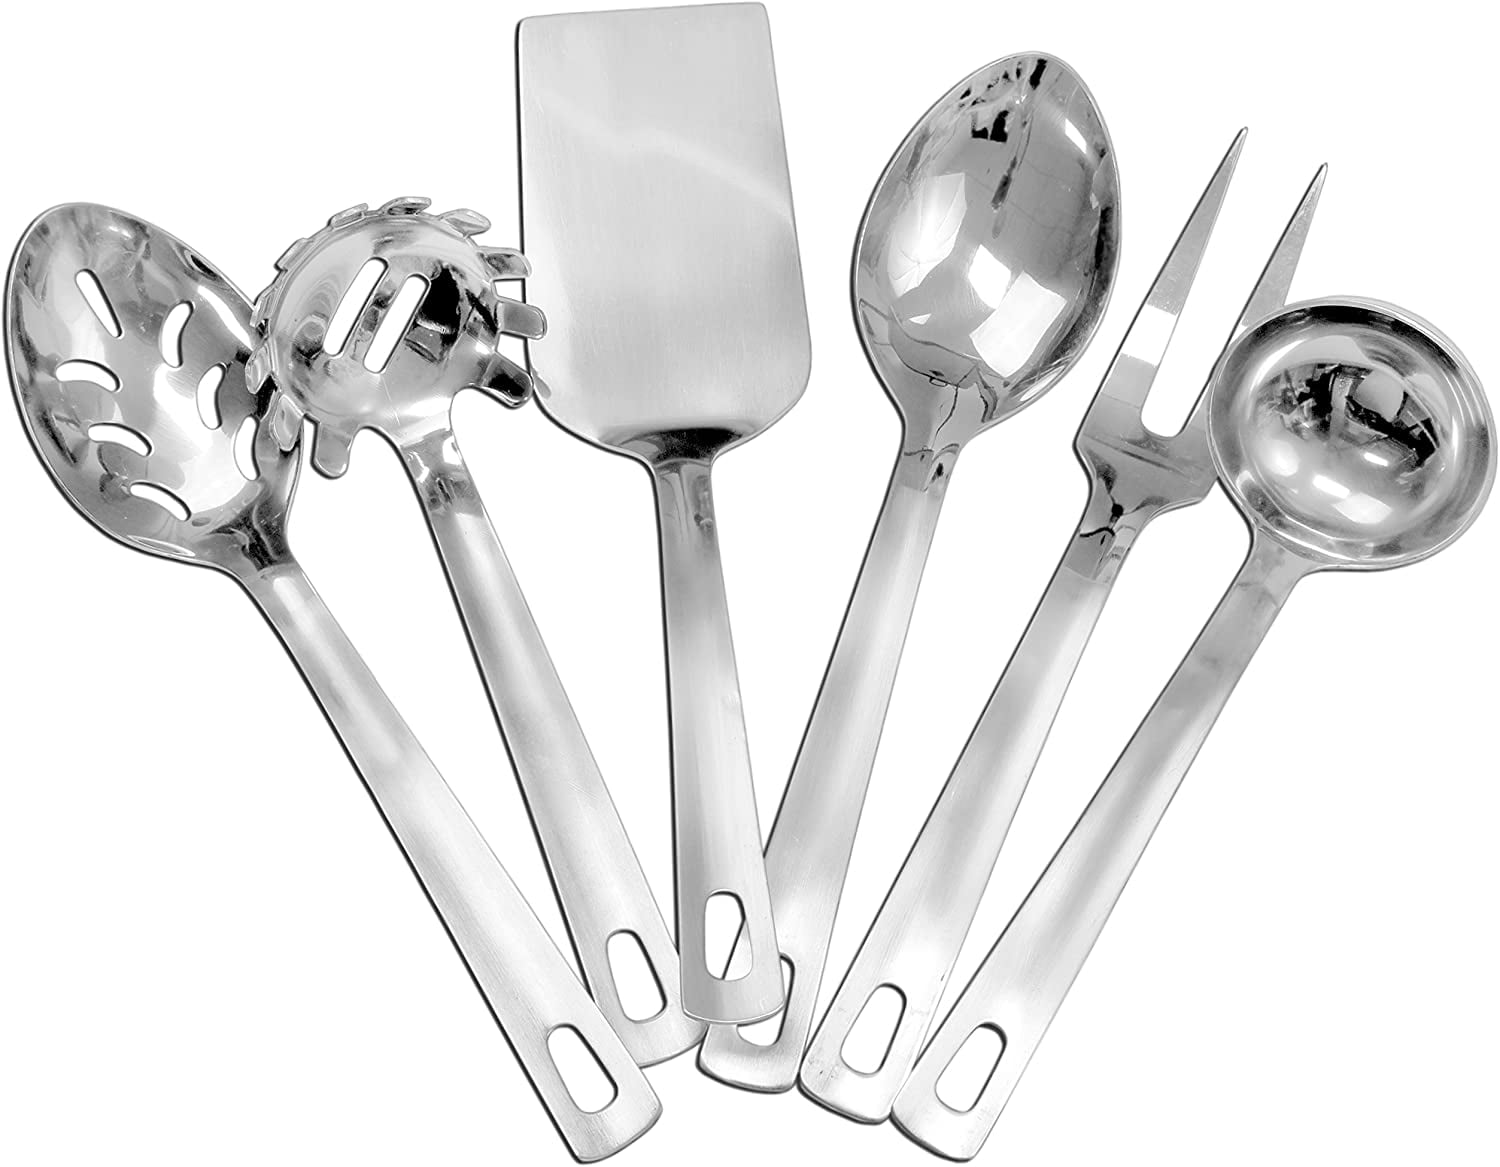 Soup Ladle Hangable Kitchenware mDesign Set of 6 Stainless Steel and Nylon Kitchen Accessories Serving Spoon Kitchen Utensil Set with Spatula Slotted Spoon and Spaghetti Scoop Grey/Silver